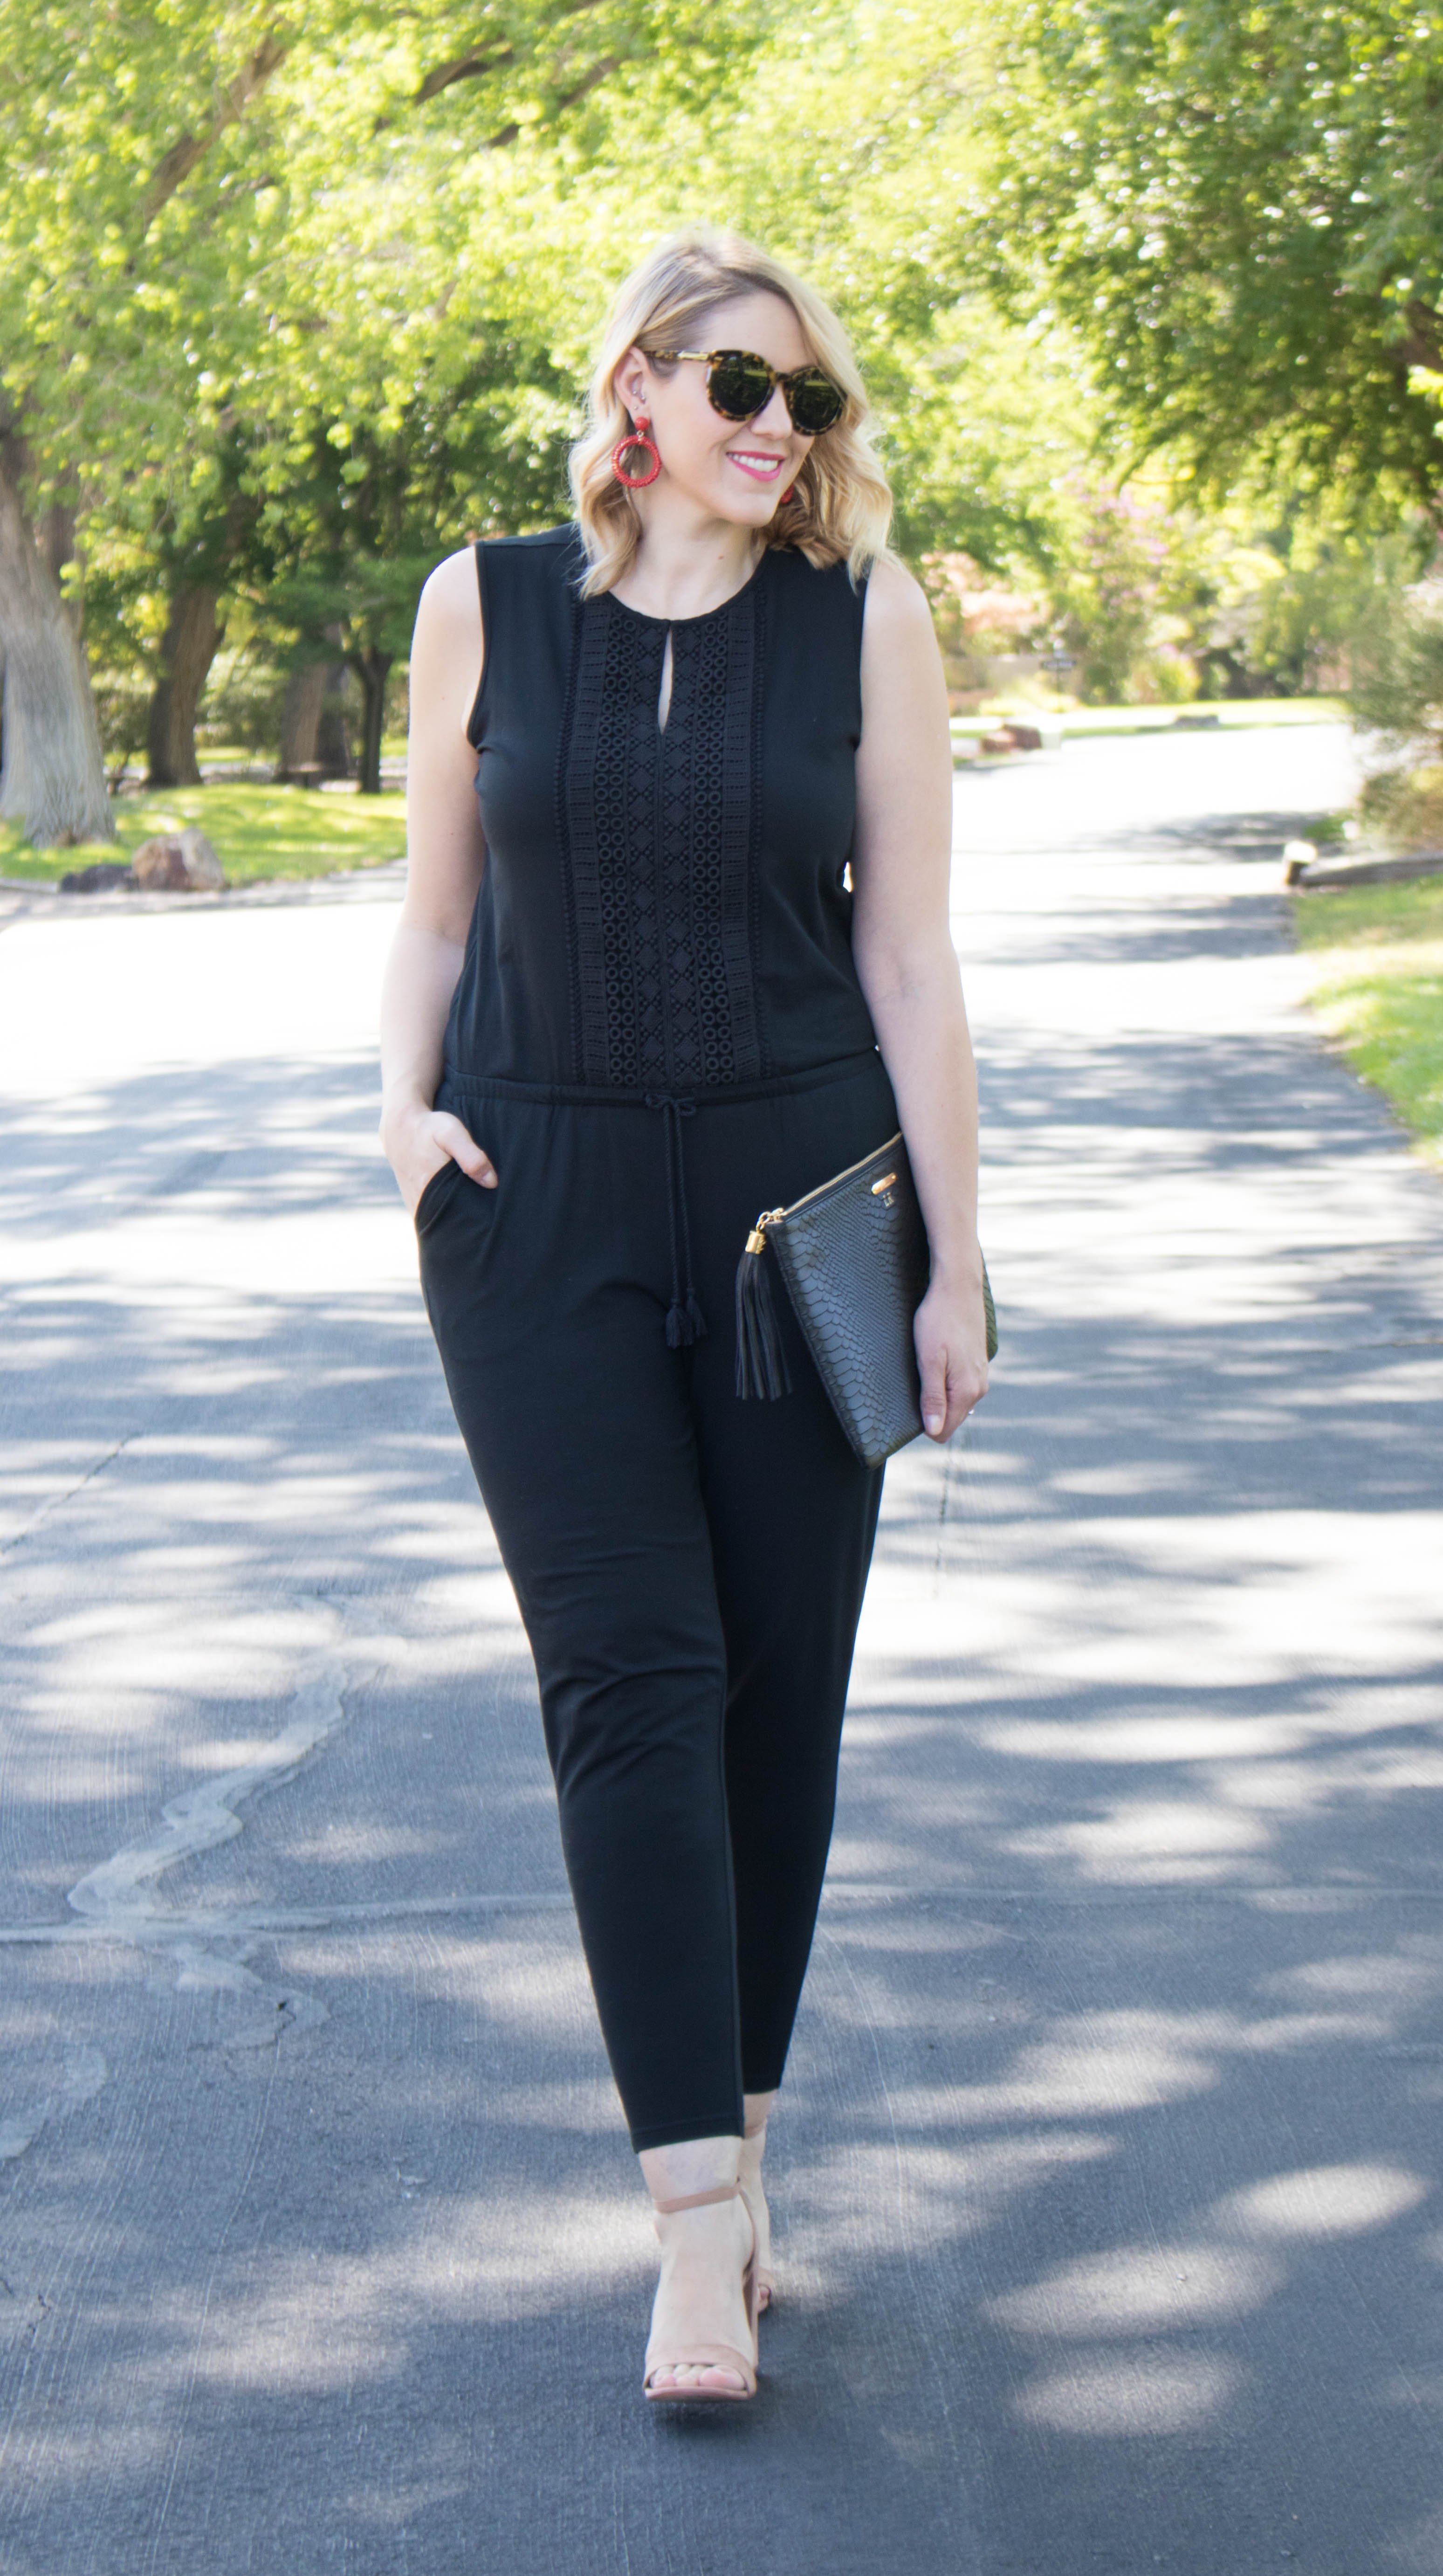 Black Earrings with Black Jumpsuit Outfits (3 ideas & outfits) | Lookastic-hkpdtq2012.edu.vn